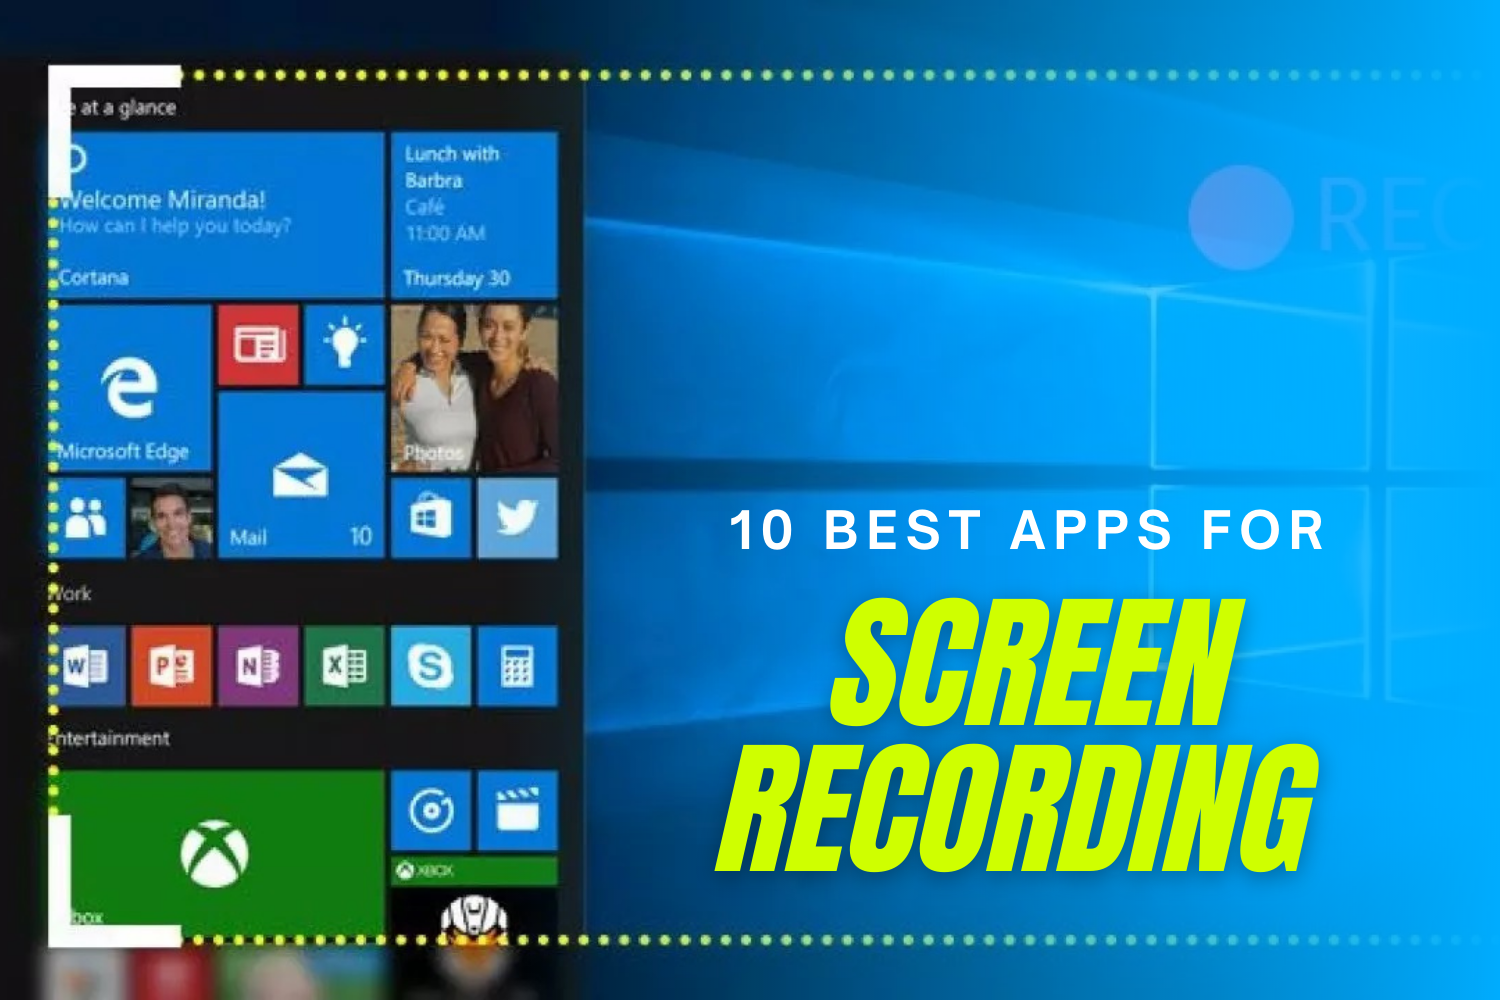 10-Best-Apps-for-Screen-Recording-to-enhance-your-Blog-Social-Media-Content